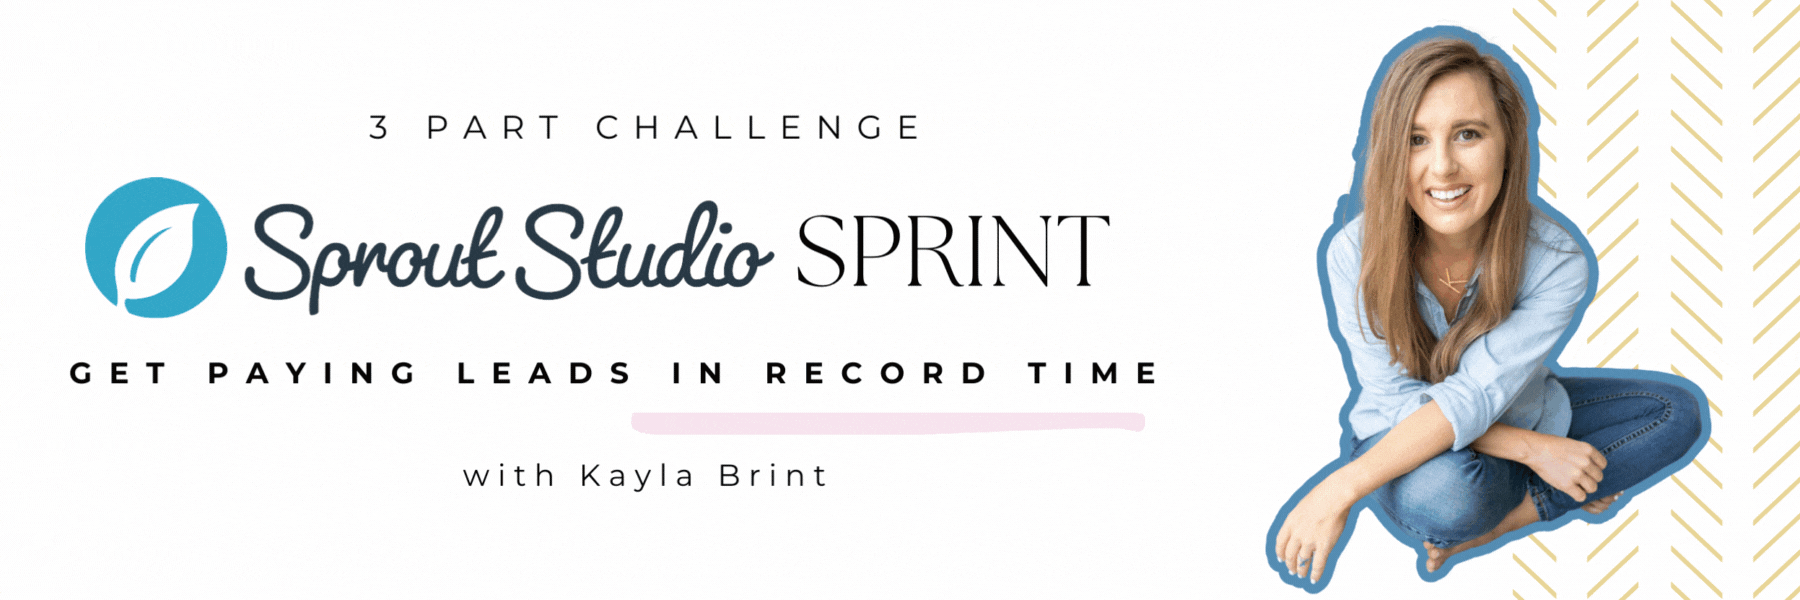 Setting Up Sprout Studio with Kayla Brint